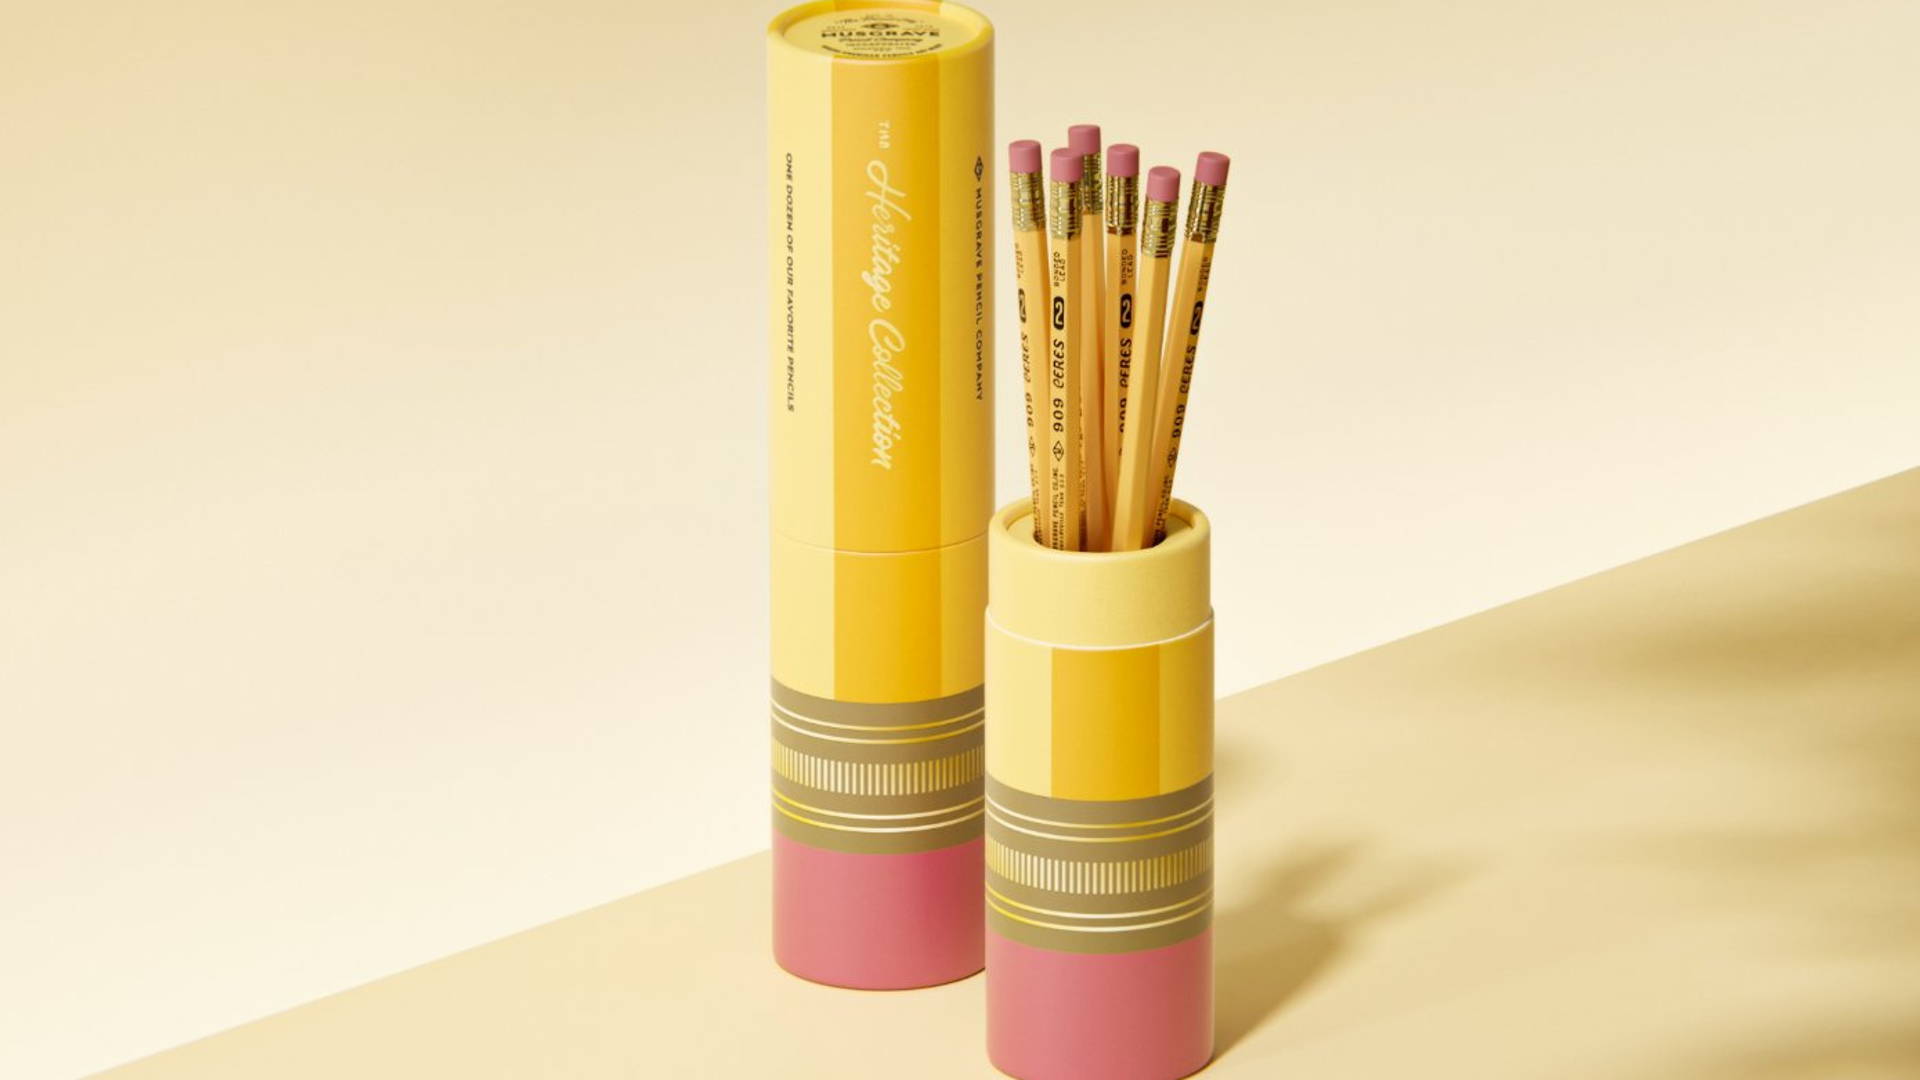 Featured image for Musgrave Pencil Company Has Packaging That Doubles As A Keepsake